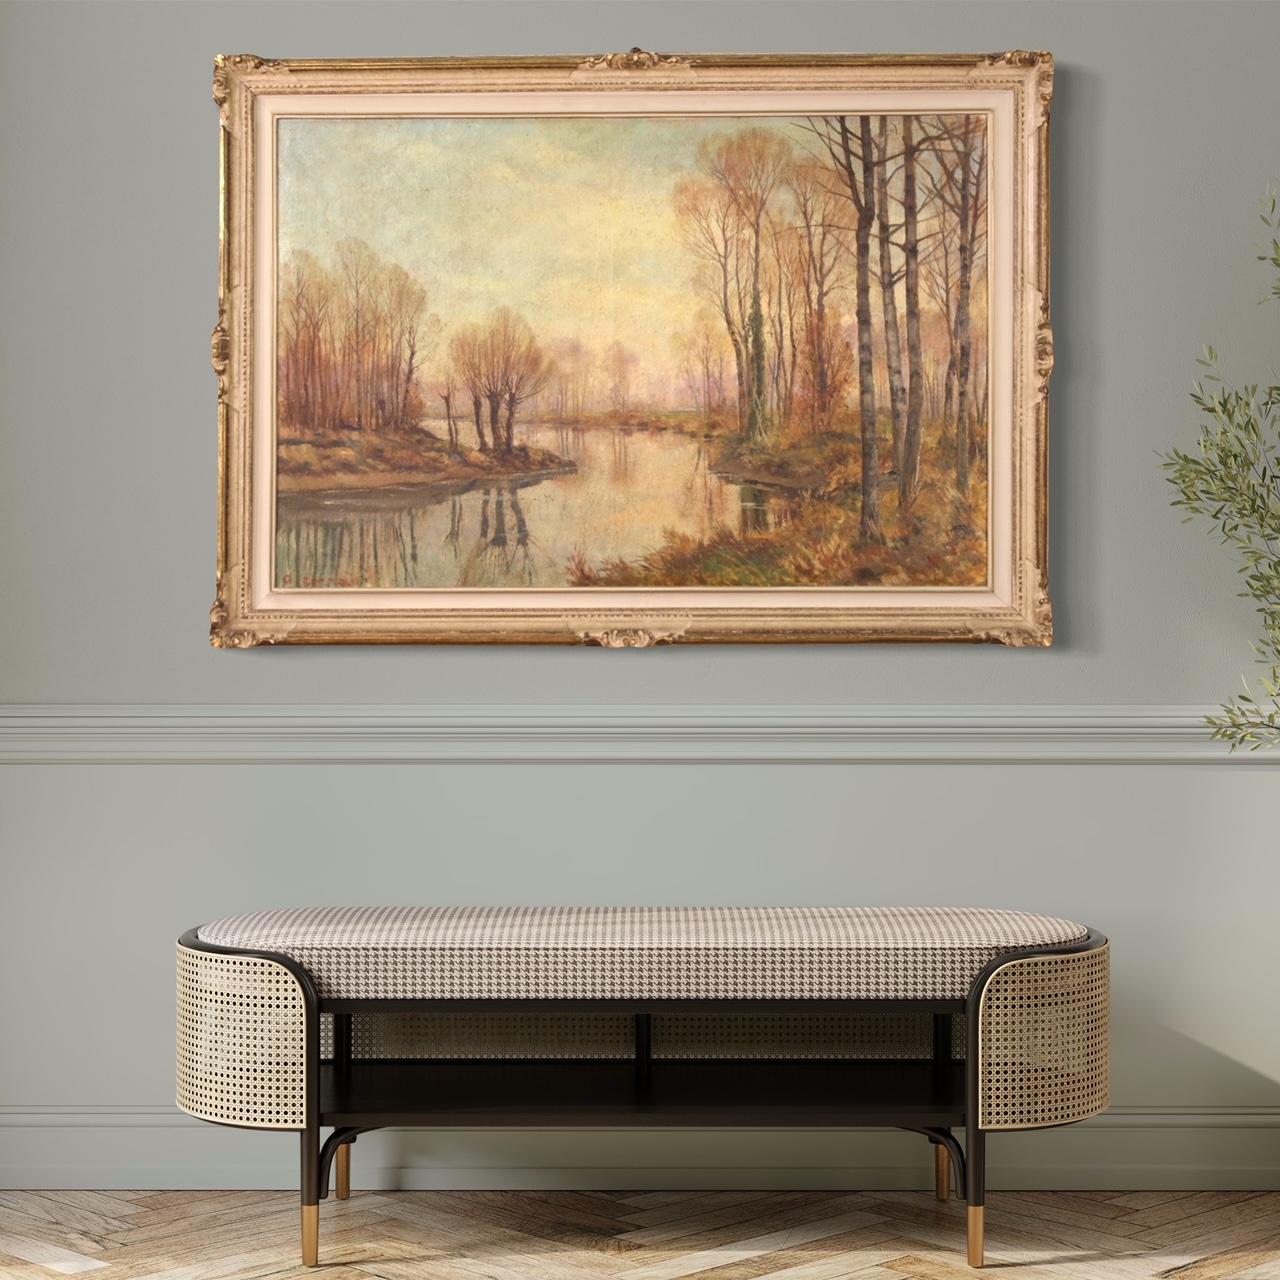 Italian painting from the mid-20th century. Oil on canvas artwork, first canvas, depicting an autumnal view, countryside river landscape of good pictorial quality. Painting adorned with a beautifully decorated lacquered and gilded (bronze tint)